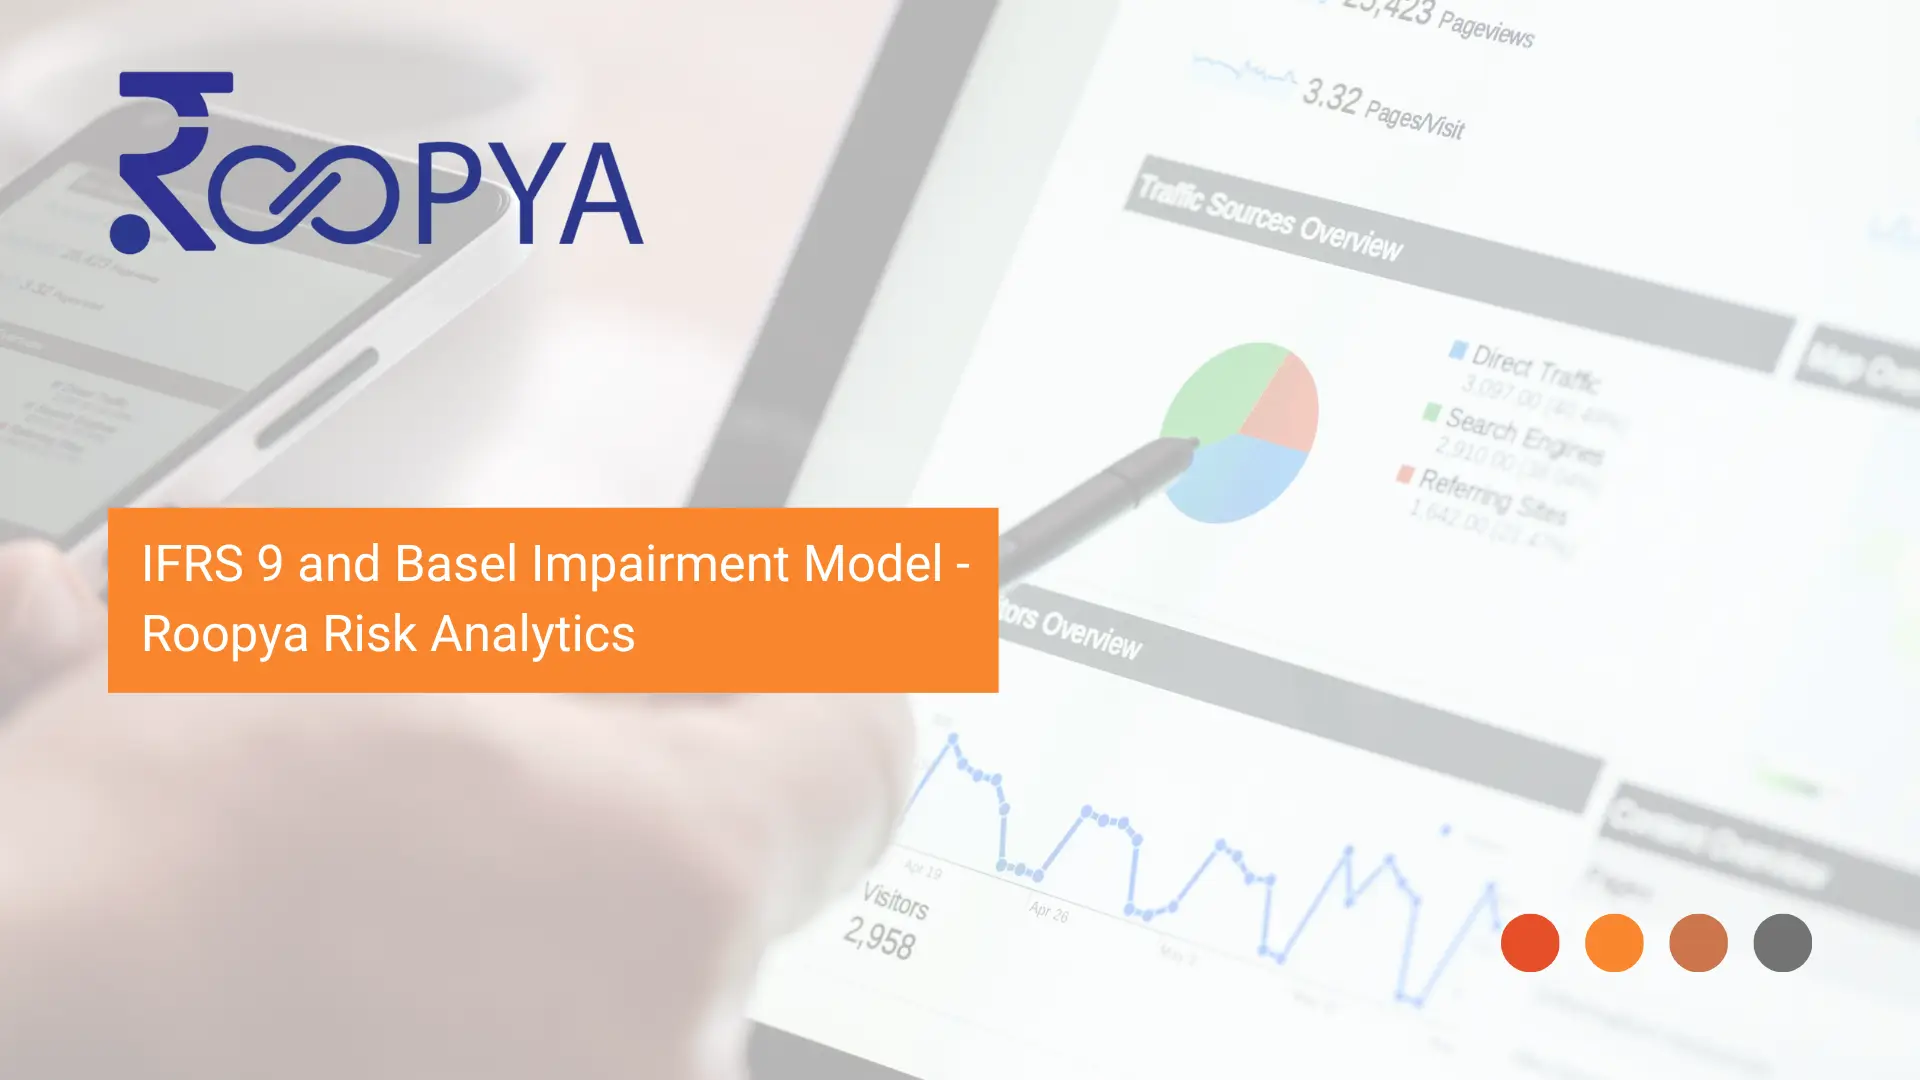 IFRS 9 and Basel Impairment Model – Roopya Risk Analytics